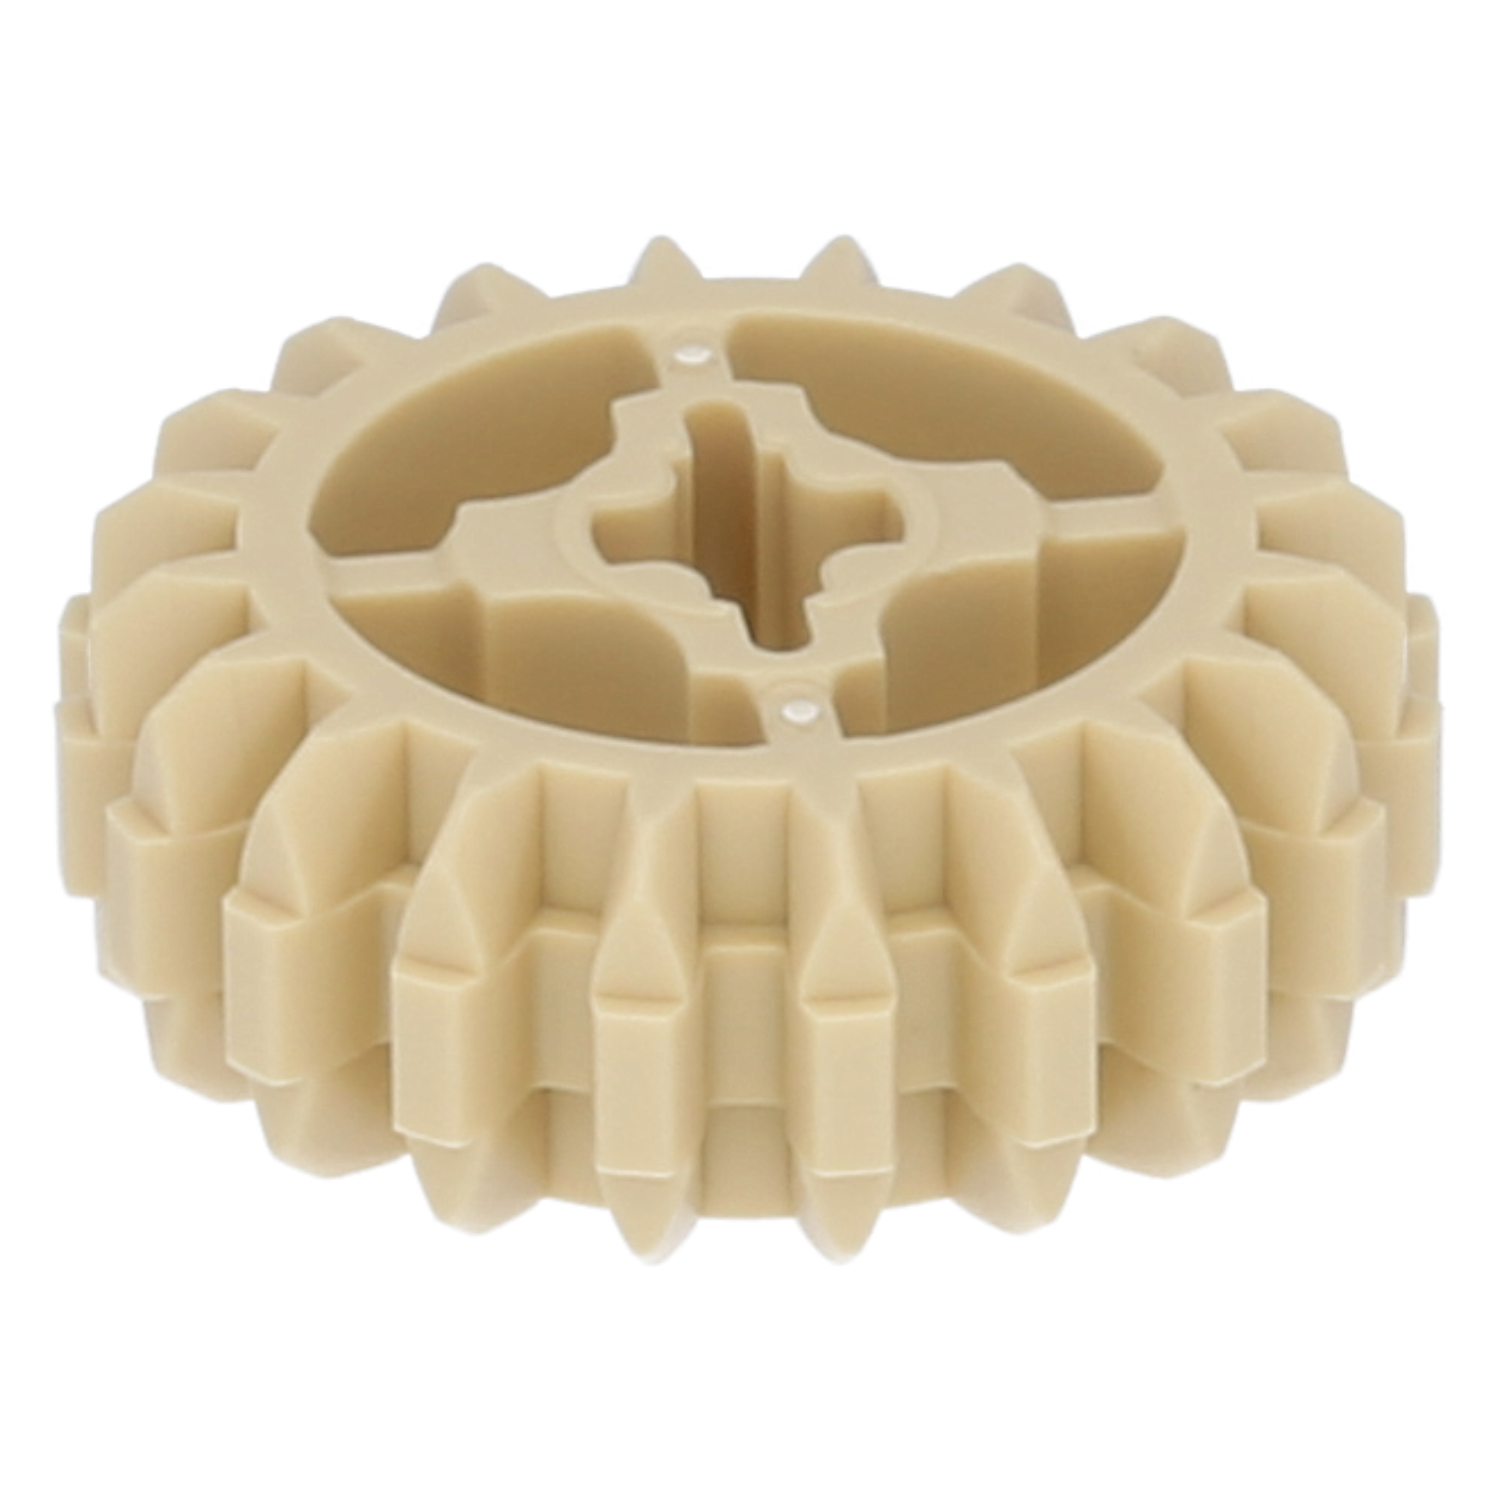 LEGO Technic gears - 20 -toothy with double chamber